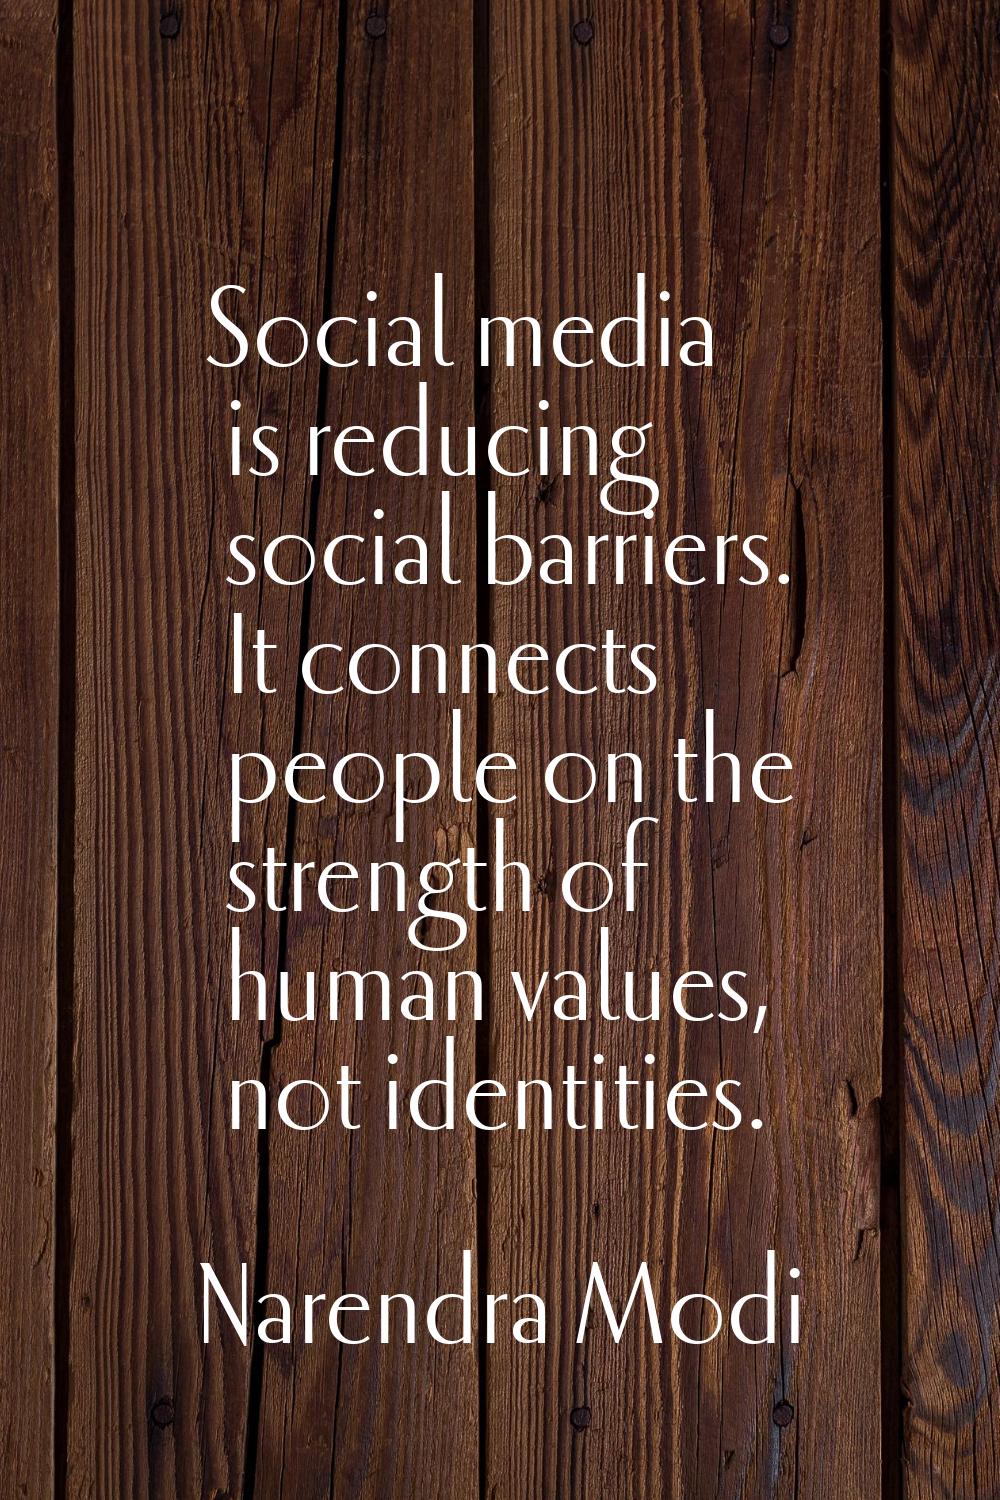 Social media is reducing social barriers. It connects people on the strength of human values, not i